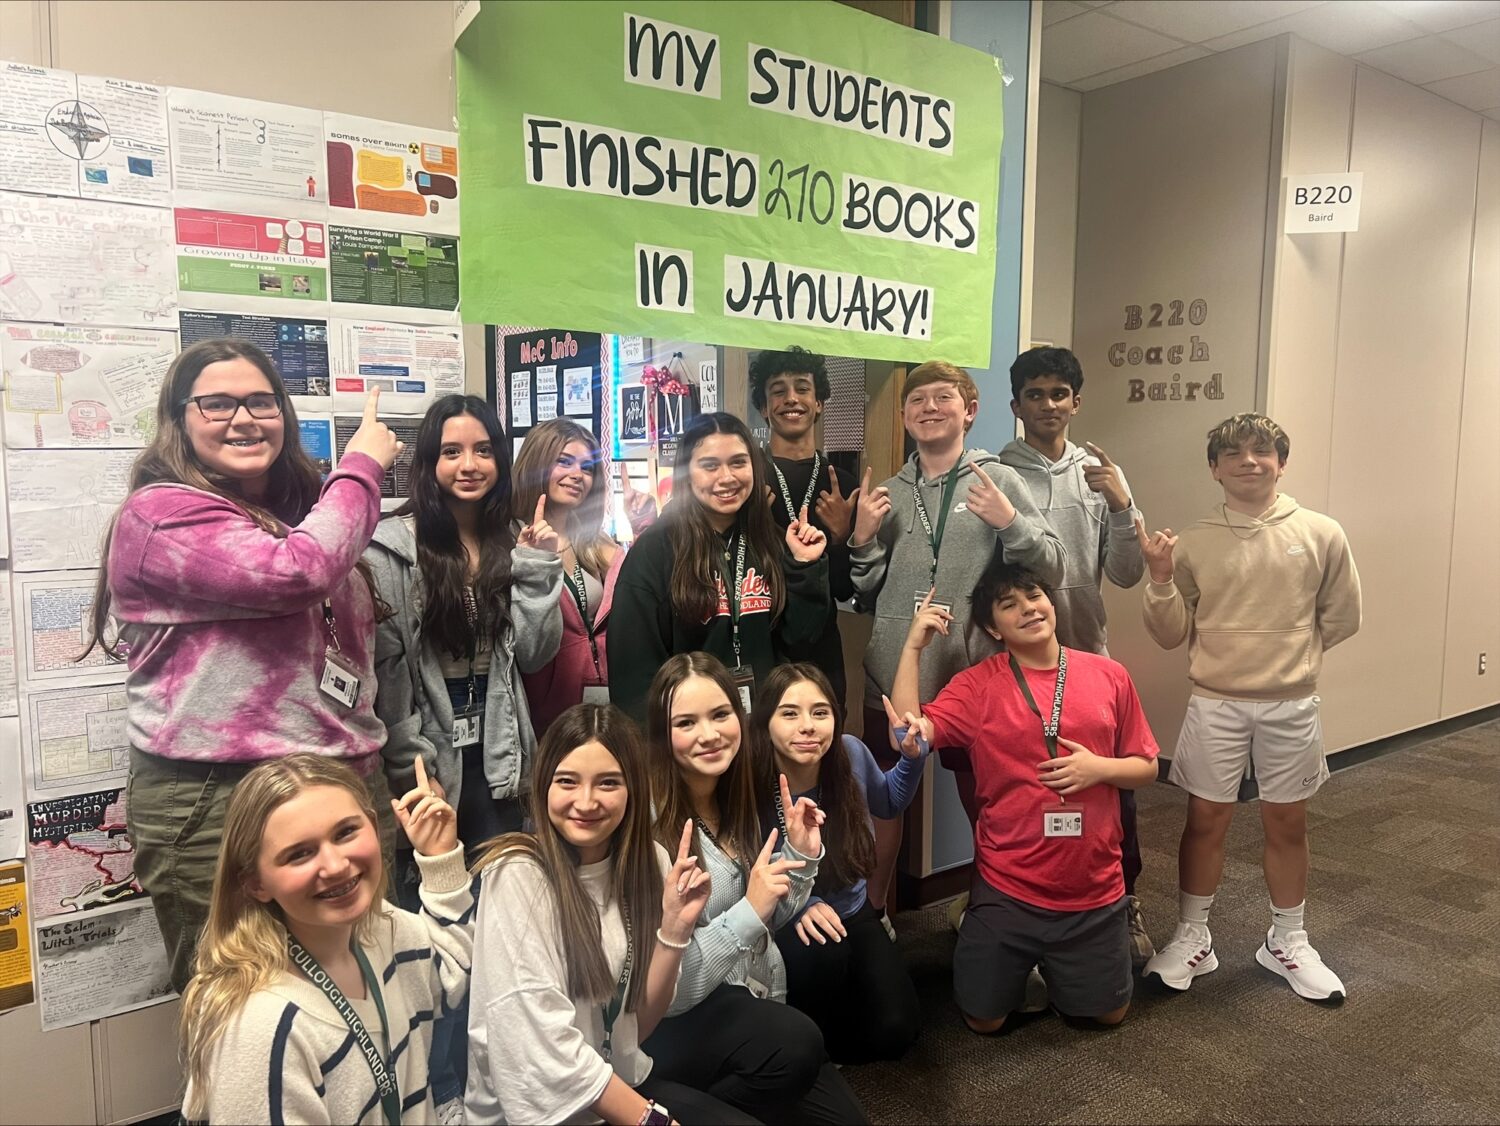 Several McCullough Junior High students pose under a sign displaying how many books they read in January.